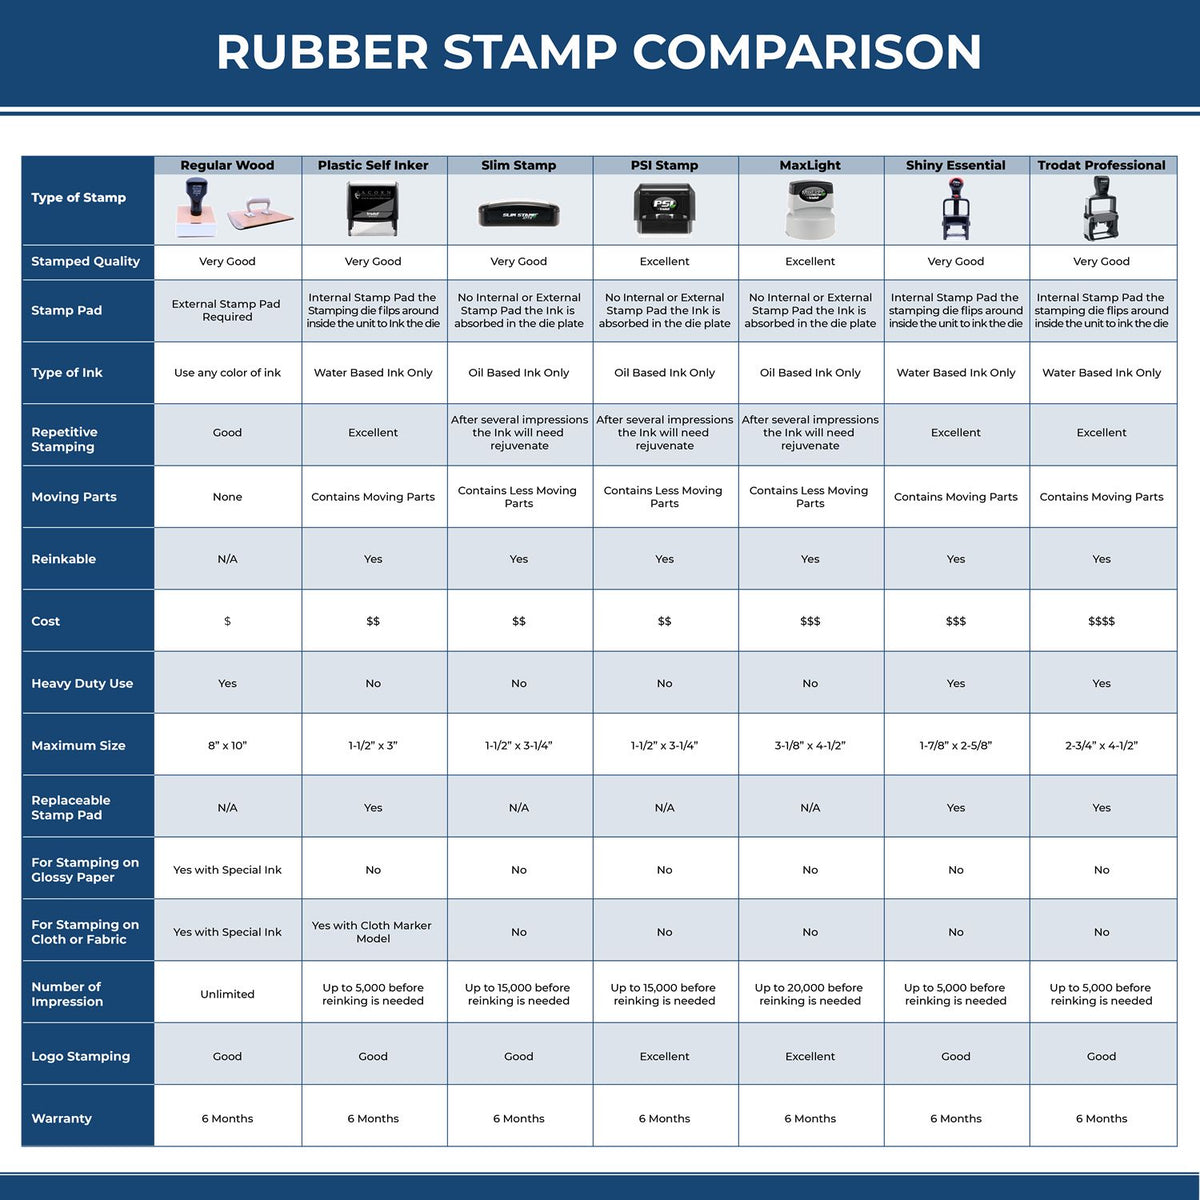 Large For Deposit Only Rubber Stamp 4133R Rubber Stamp Comparison